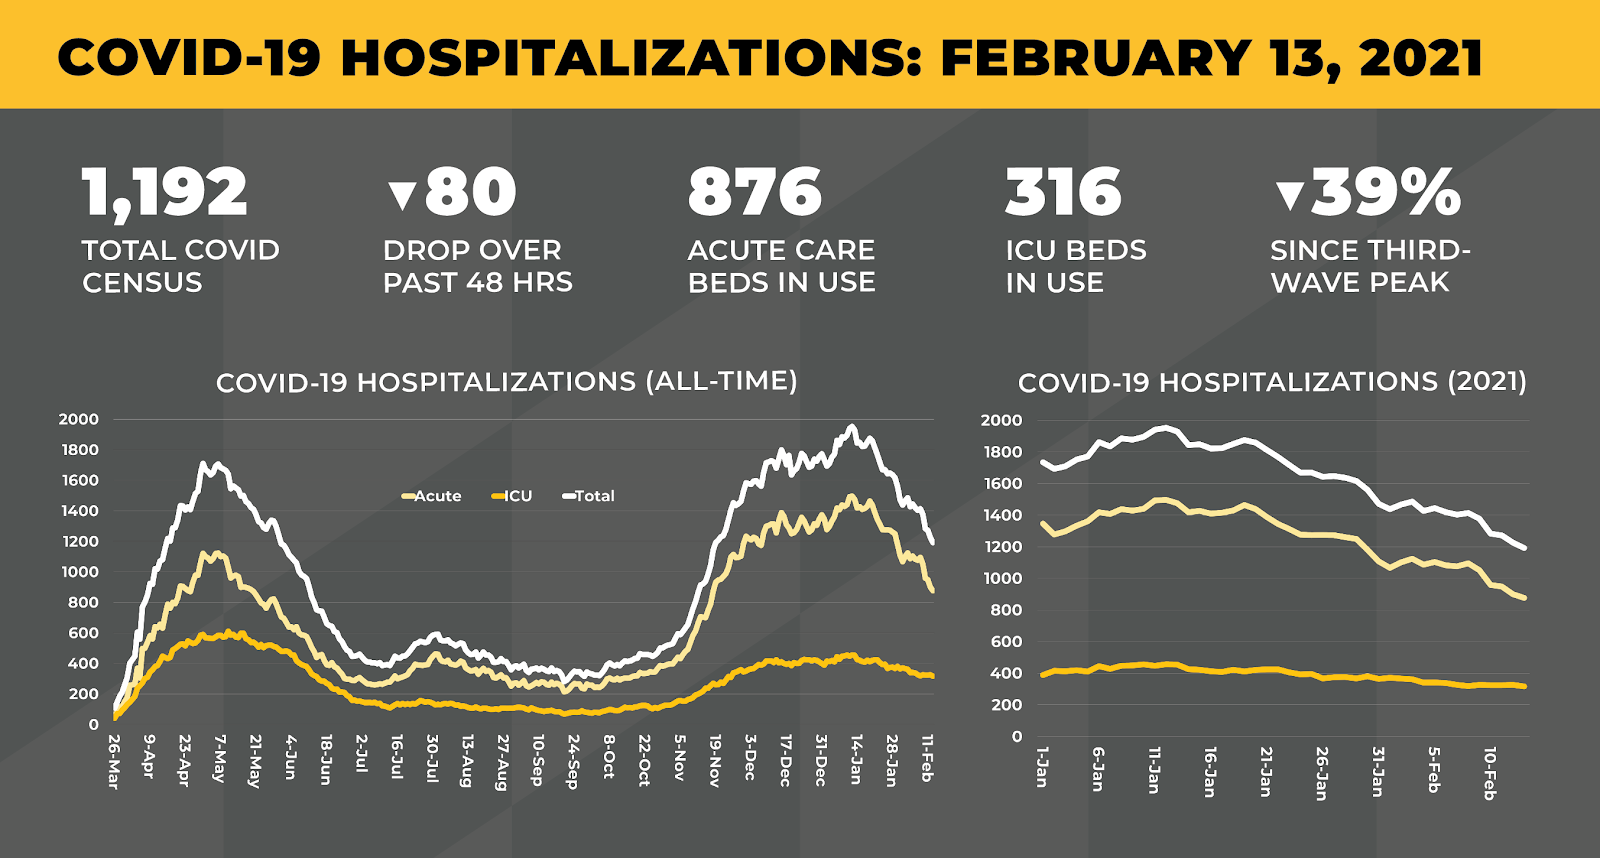 Infographic showing hospitalization statistics for Maryland, including 1,192 total beds in use and a 39% decline since the third-wave peak.